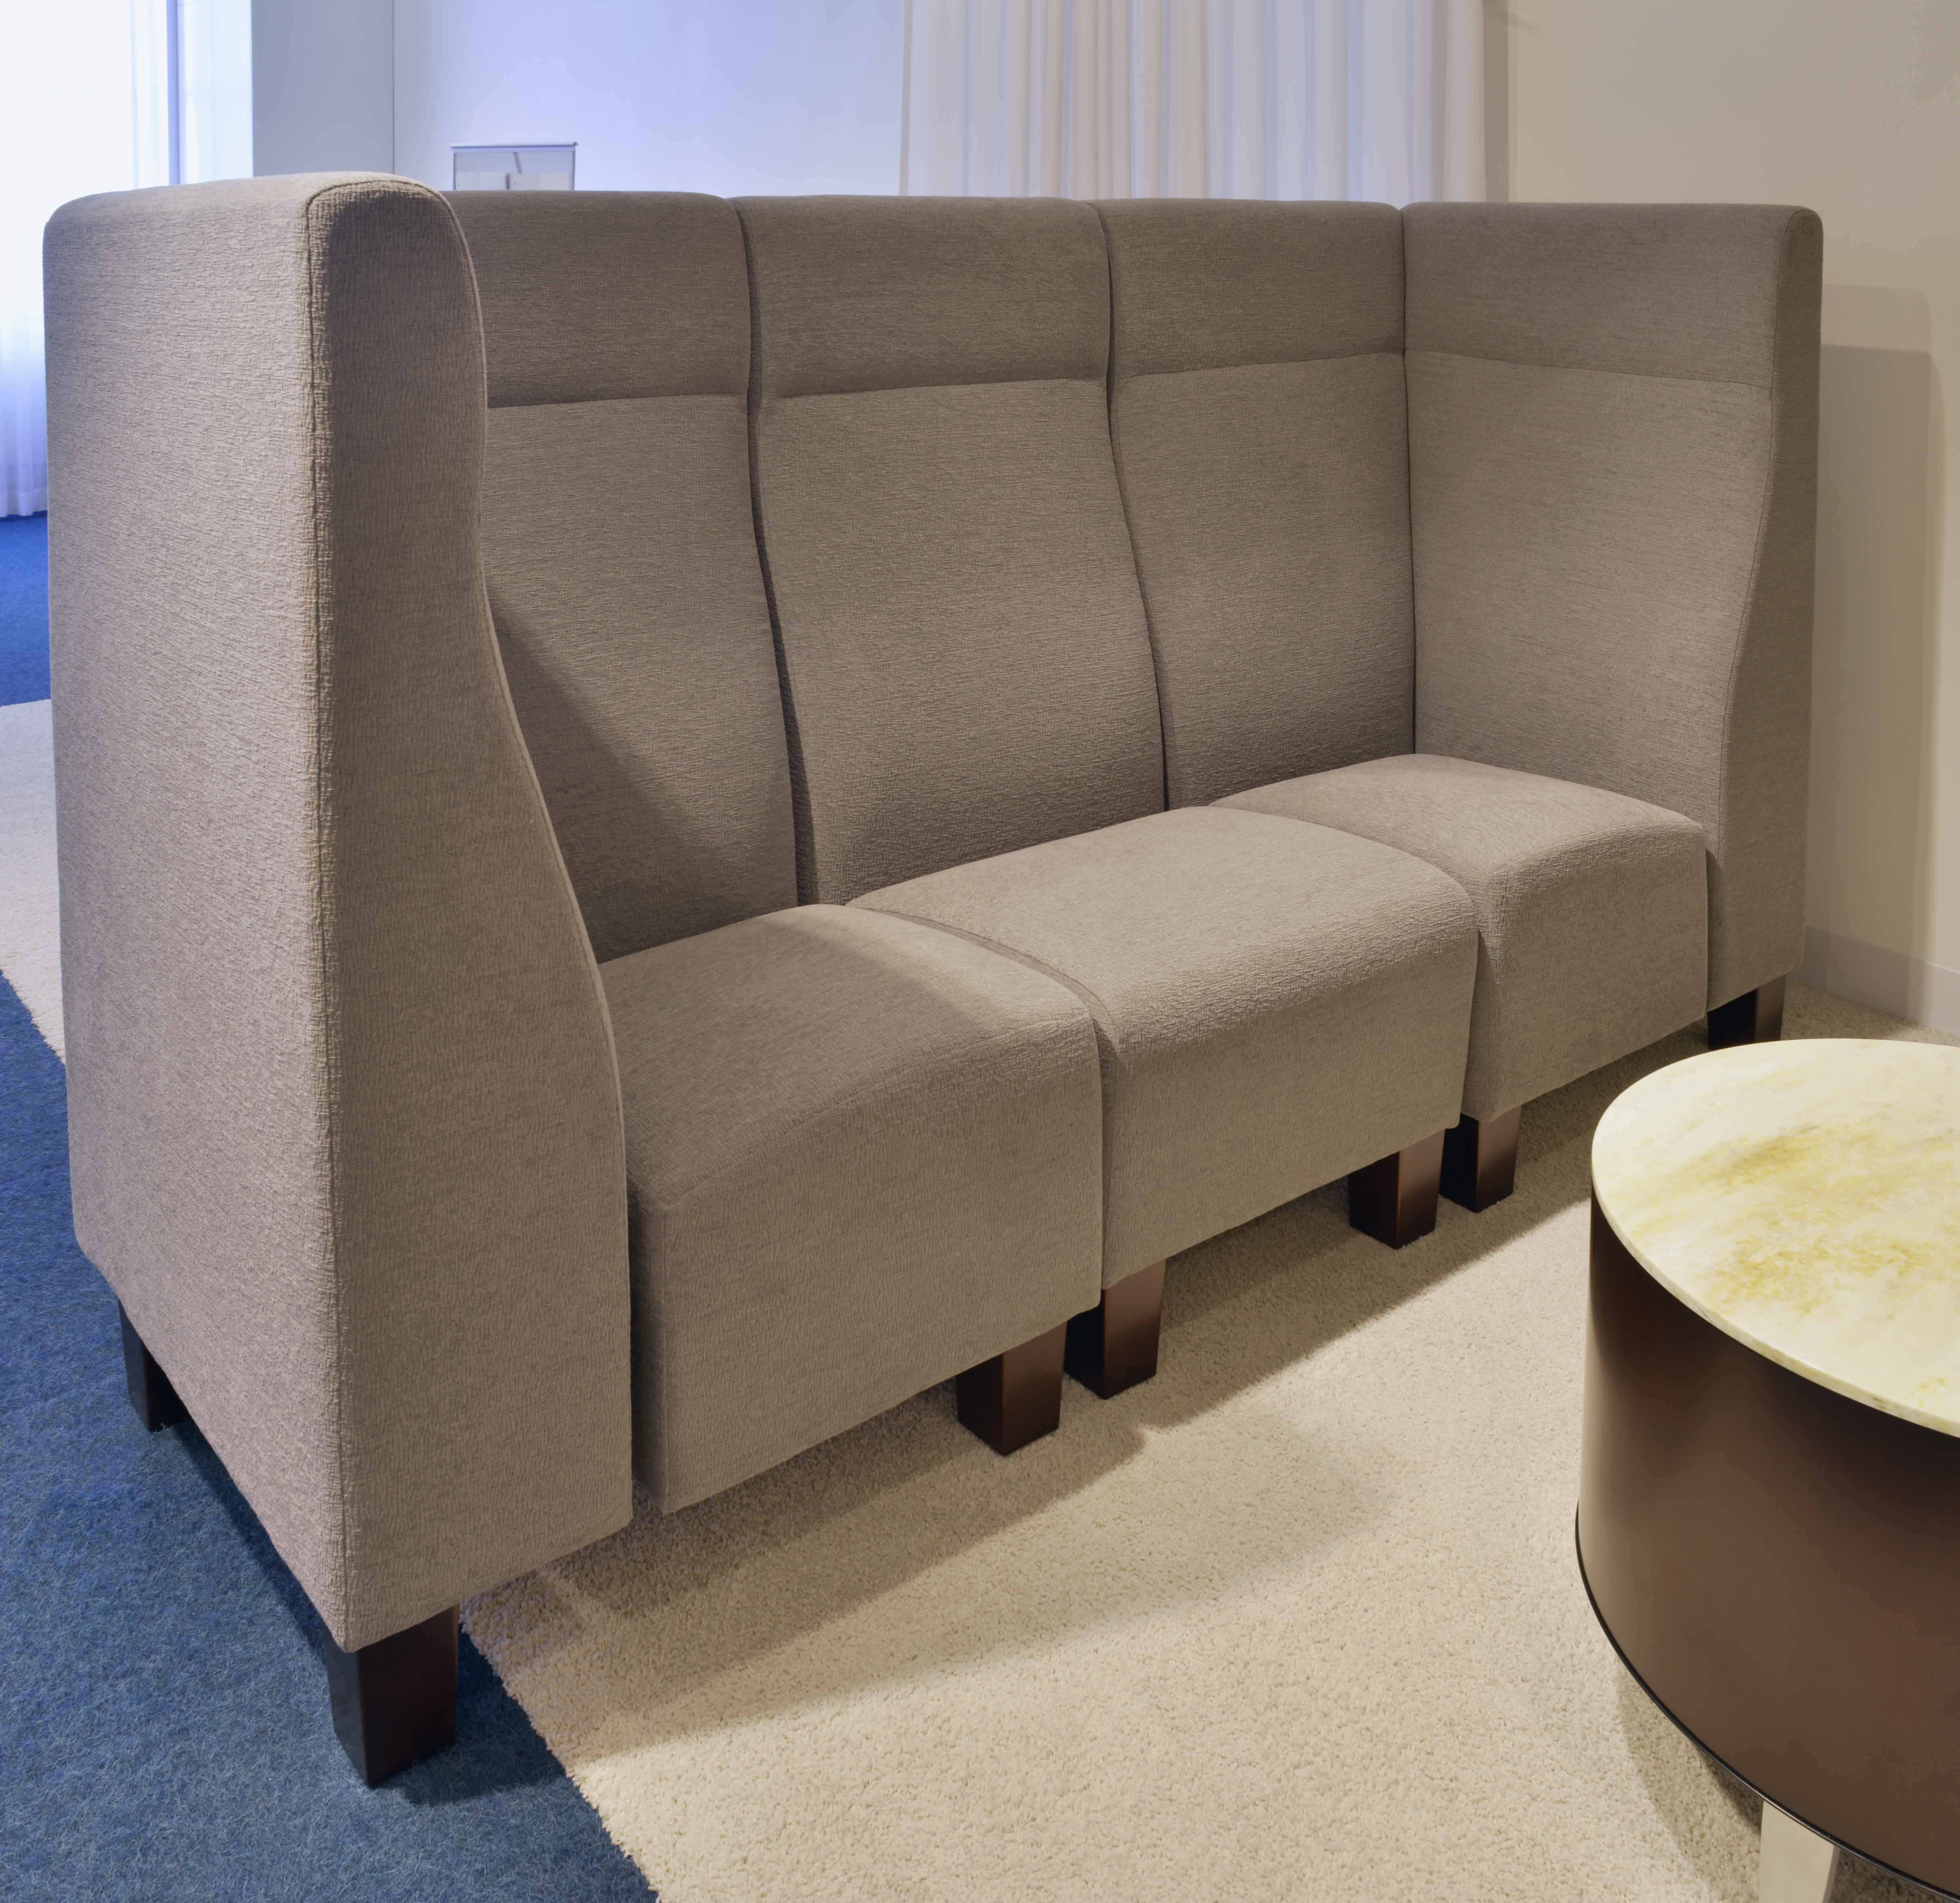 HBCH Privacy Sofa - Corner Units with 22.5